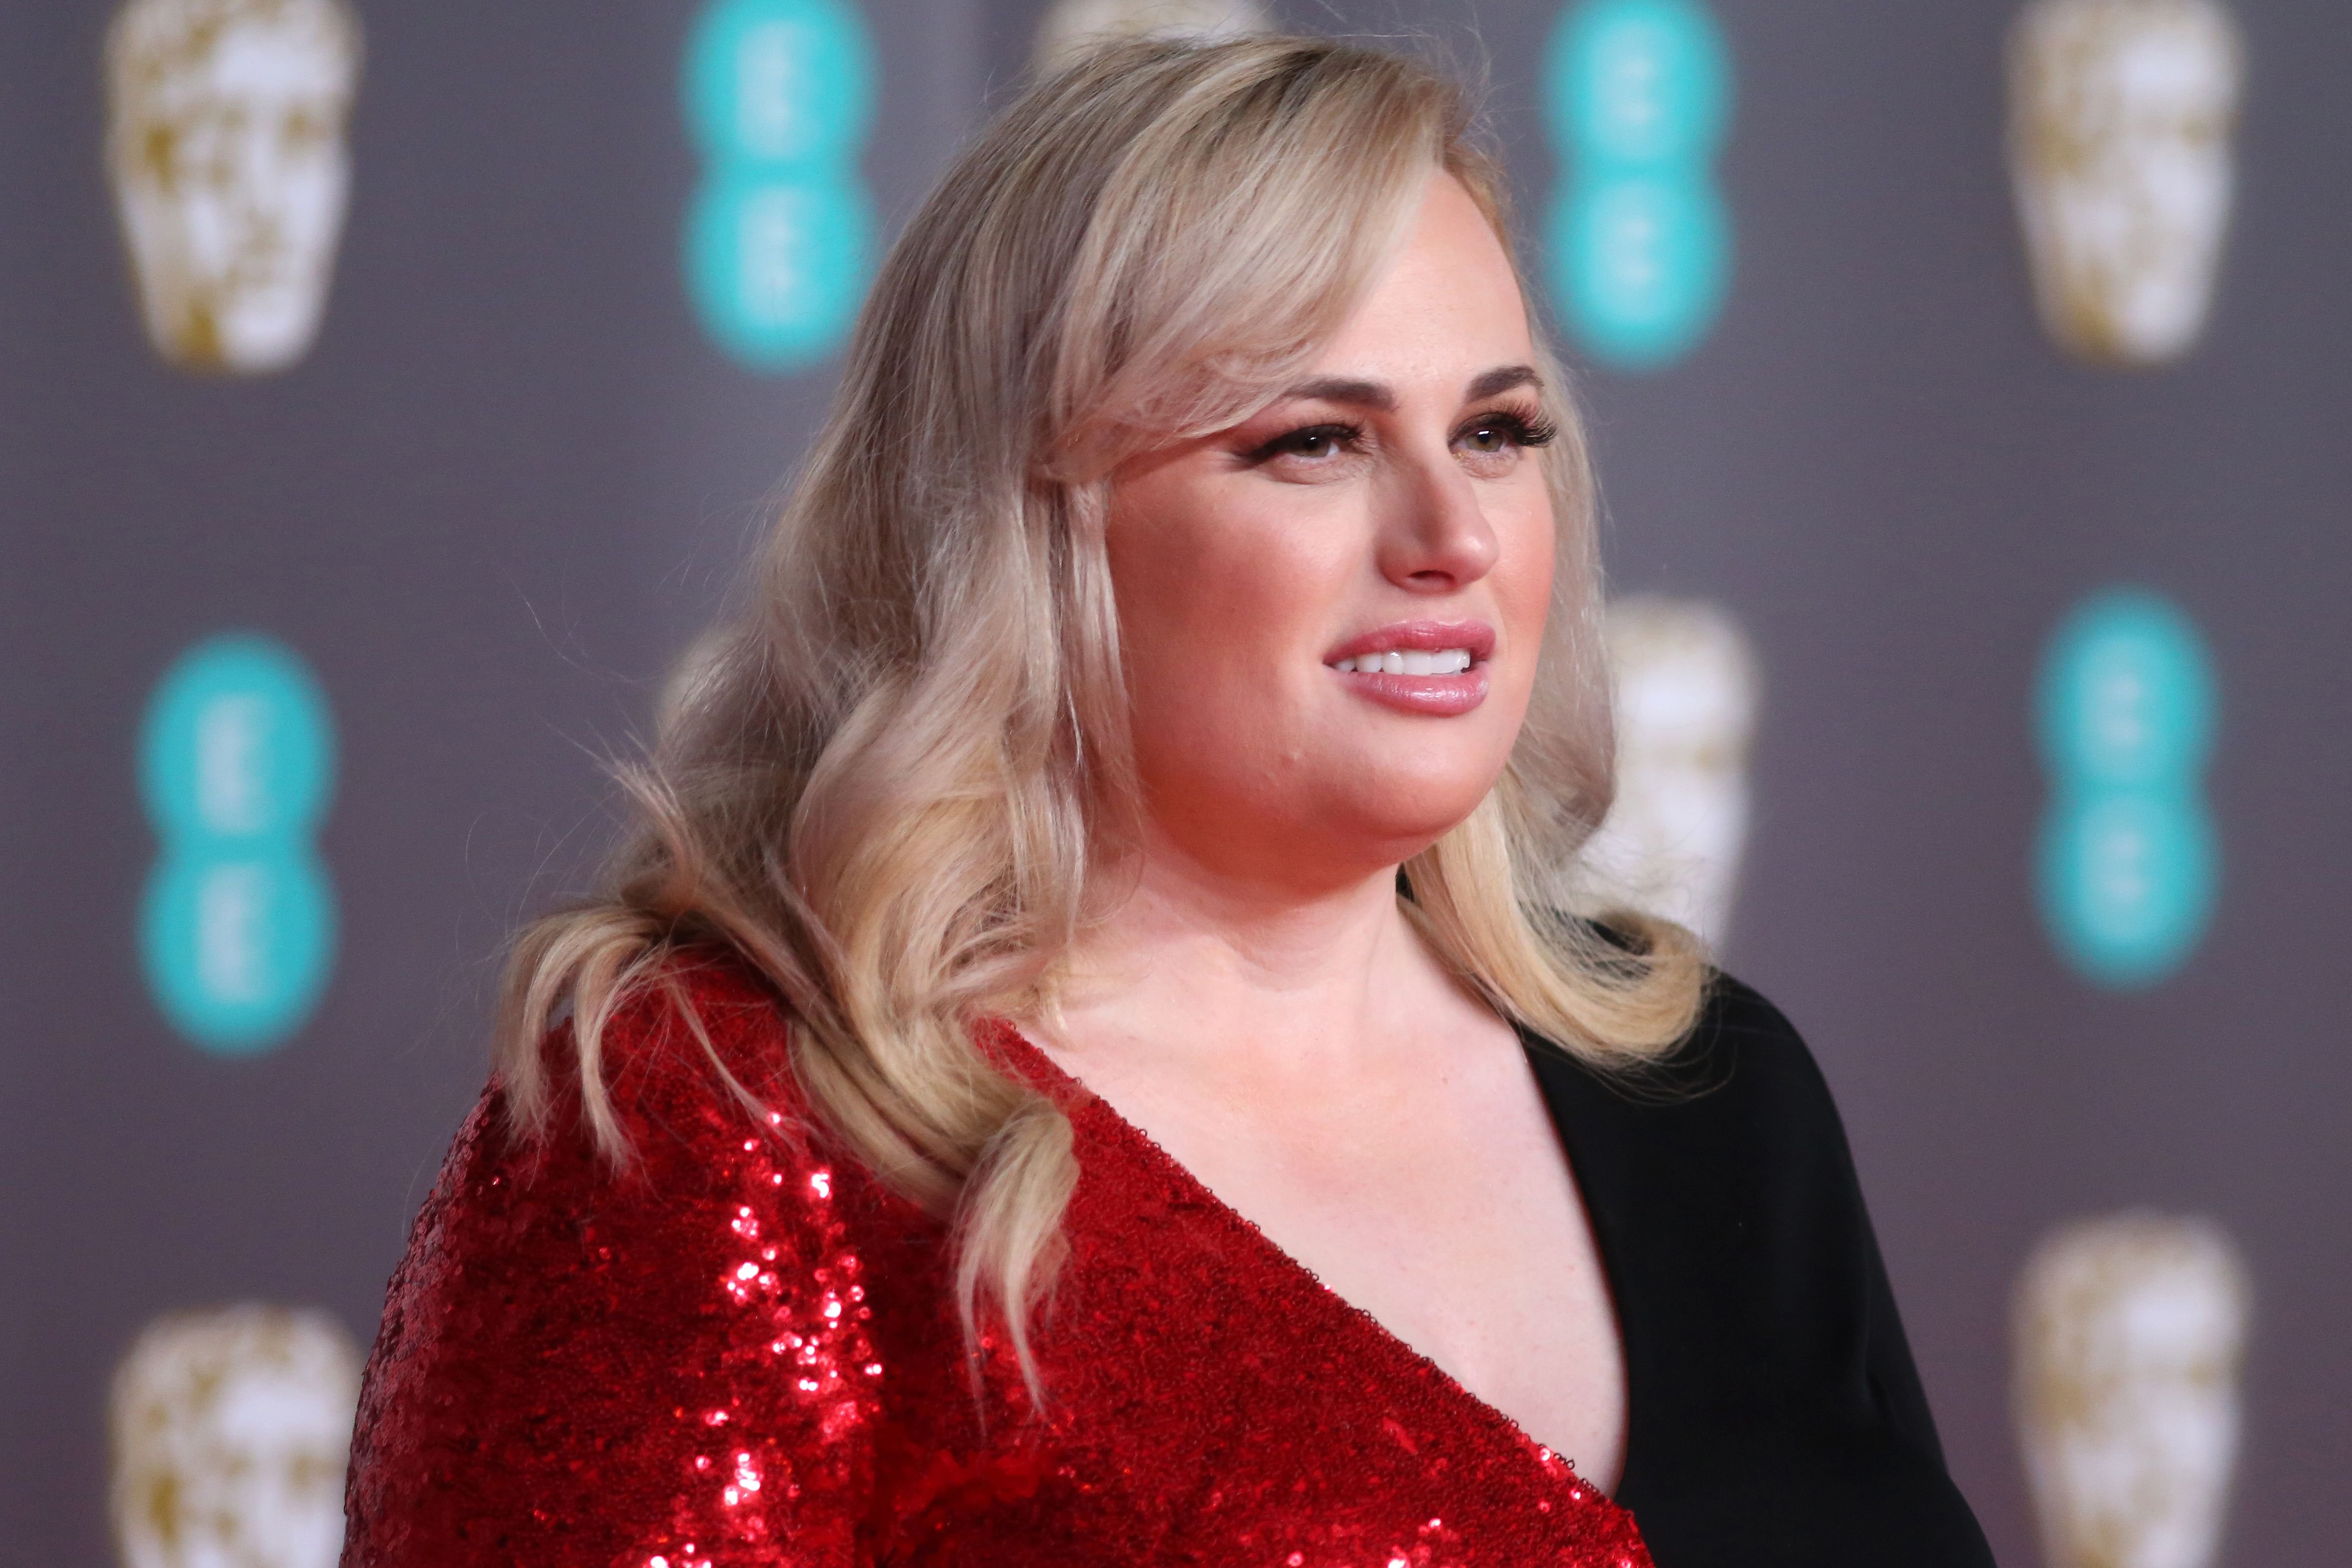 Rebel Wilson at the EE British Academy Film Awards 2020 at Royal Albert Hall on February 02, 2020 in London, England | Photo: Getty Images